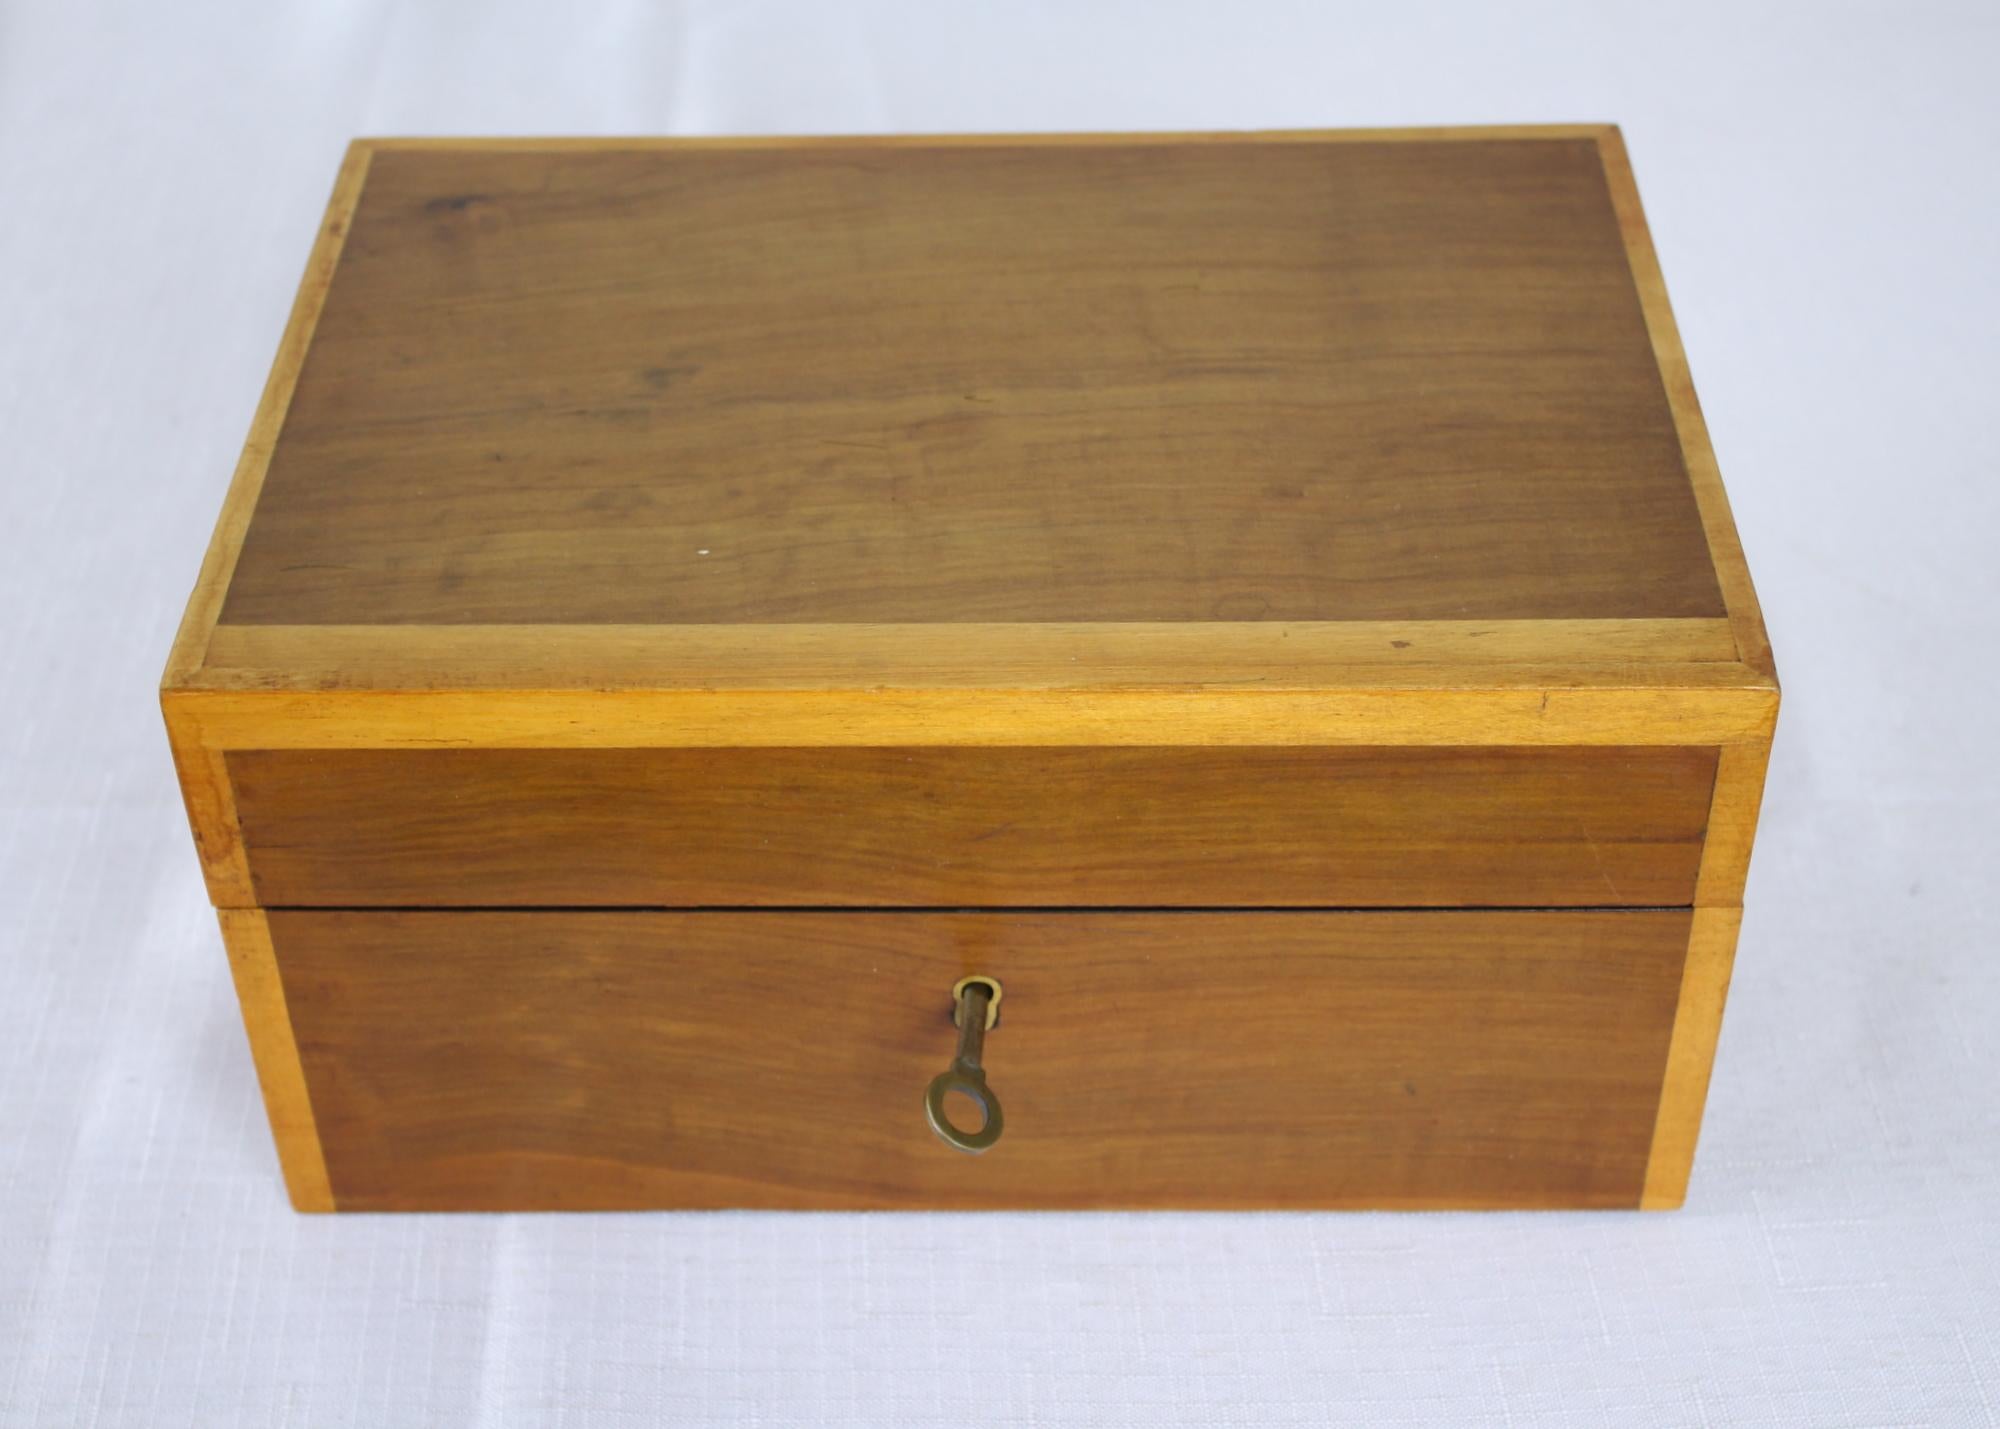 A lovely light colored walnut jewelry box with original working key. The satinwood crossbanding is in good condition and the interior of the box is clean with a green velvet bottom.